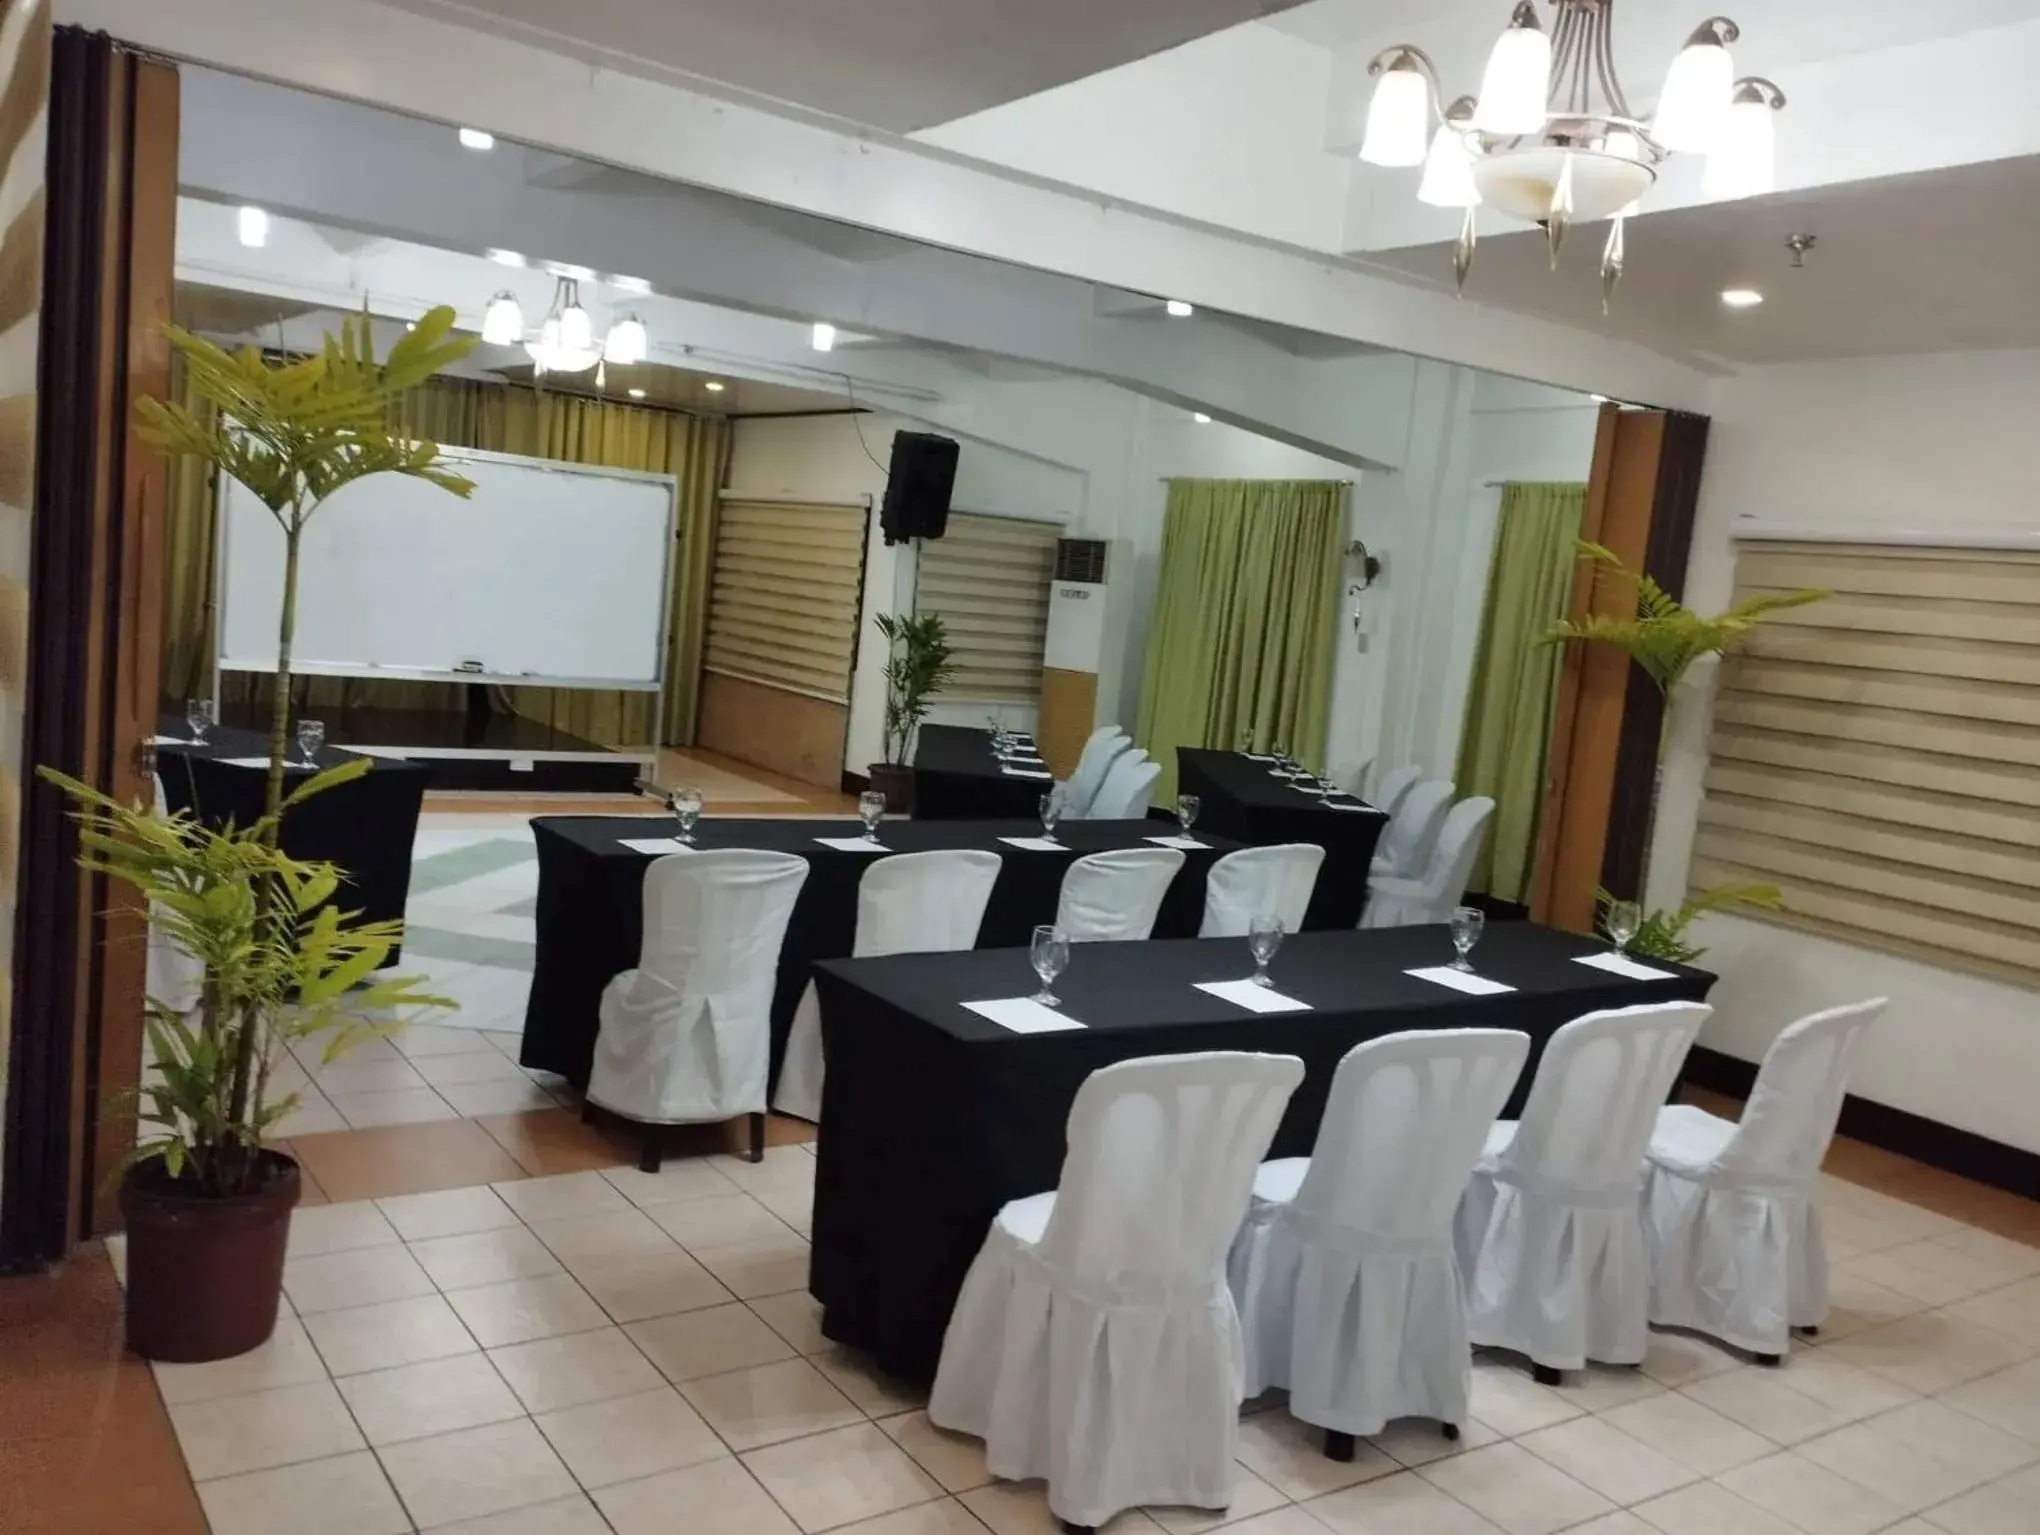 Banquet/Function facilities in Stone House Bed and Breakfast